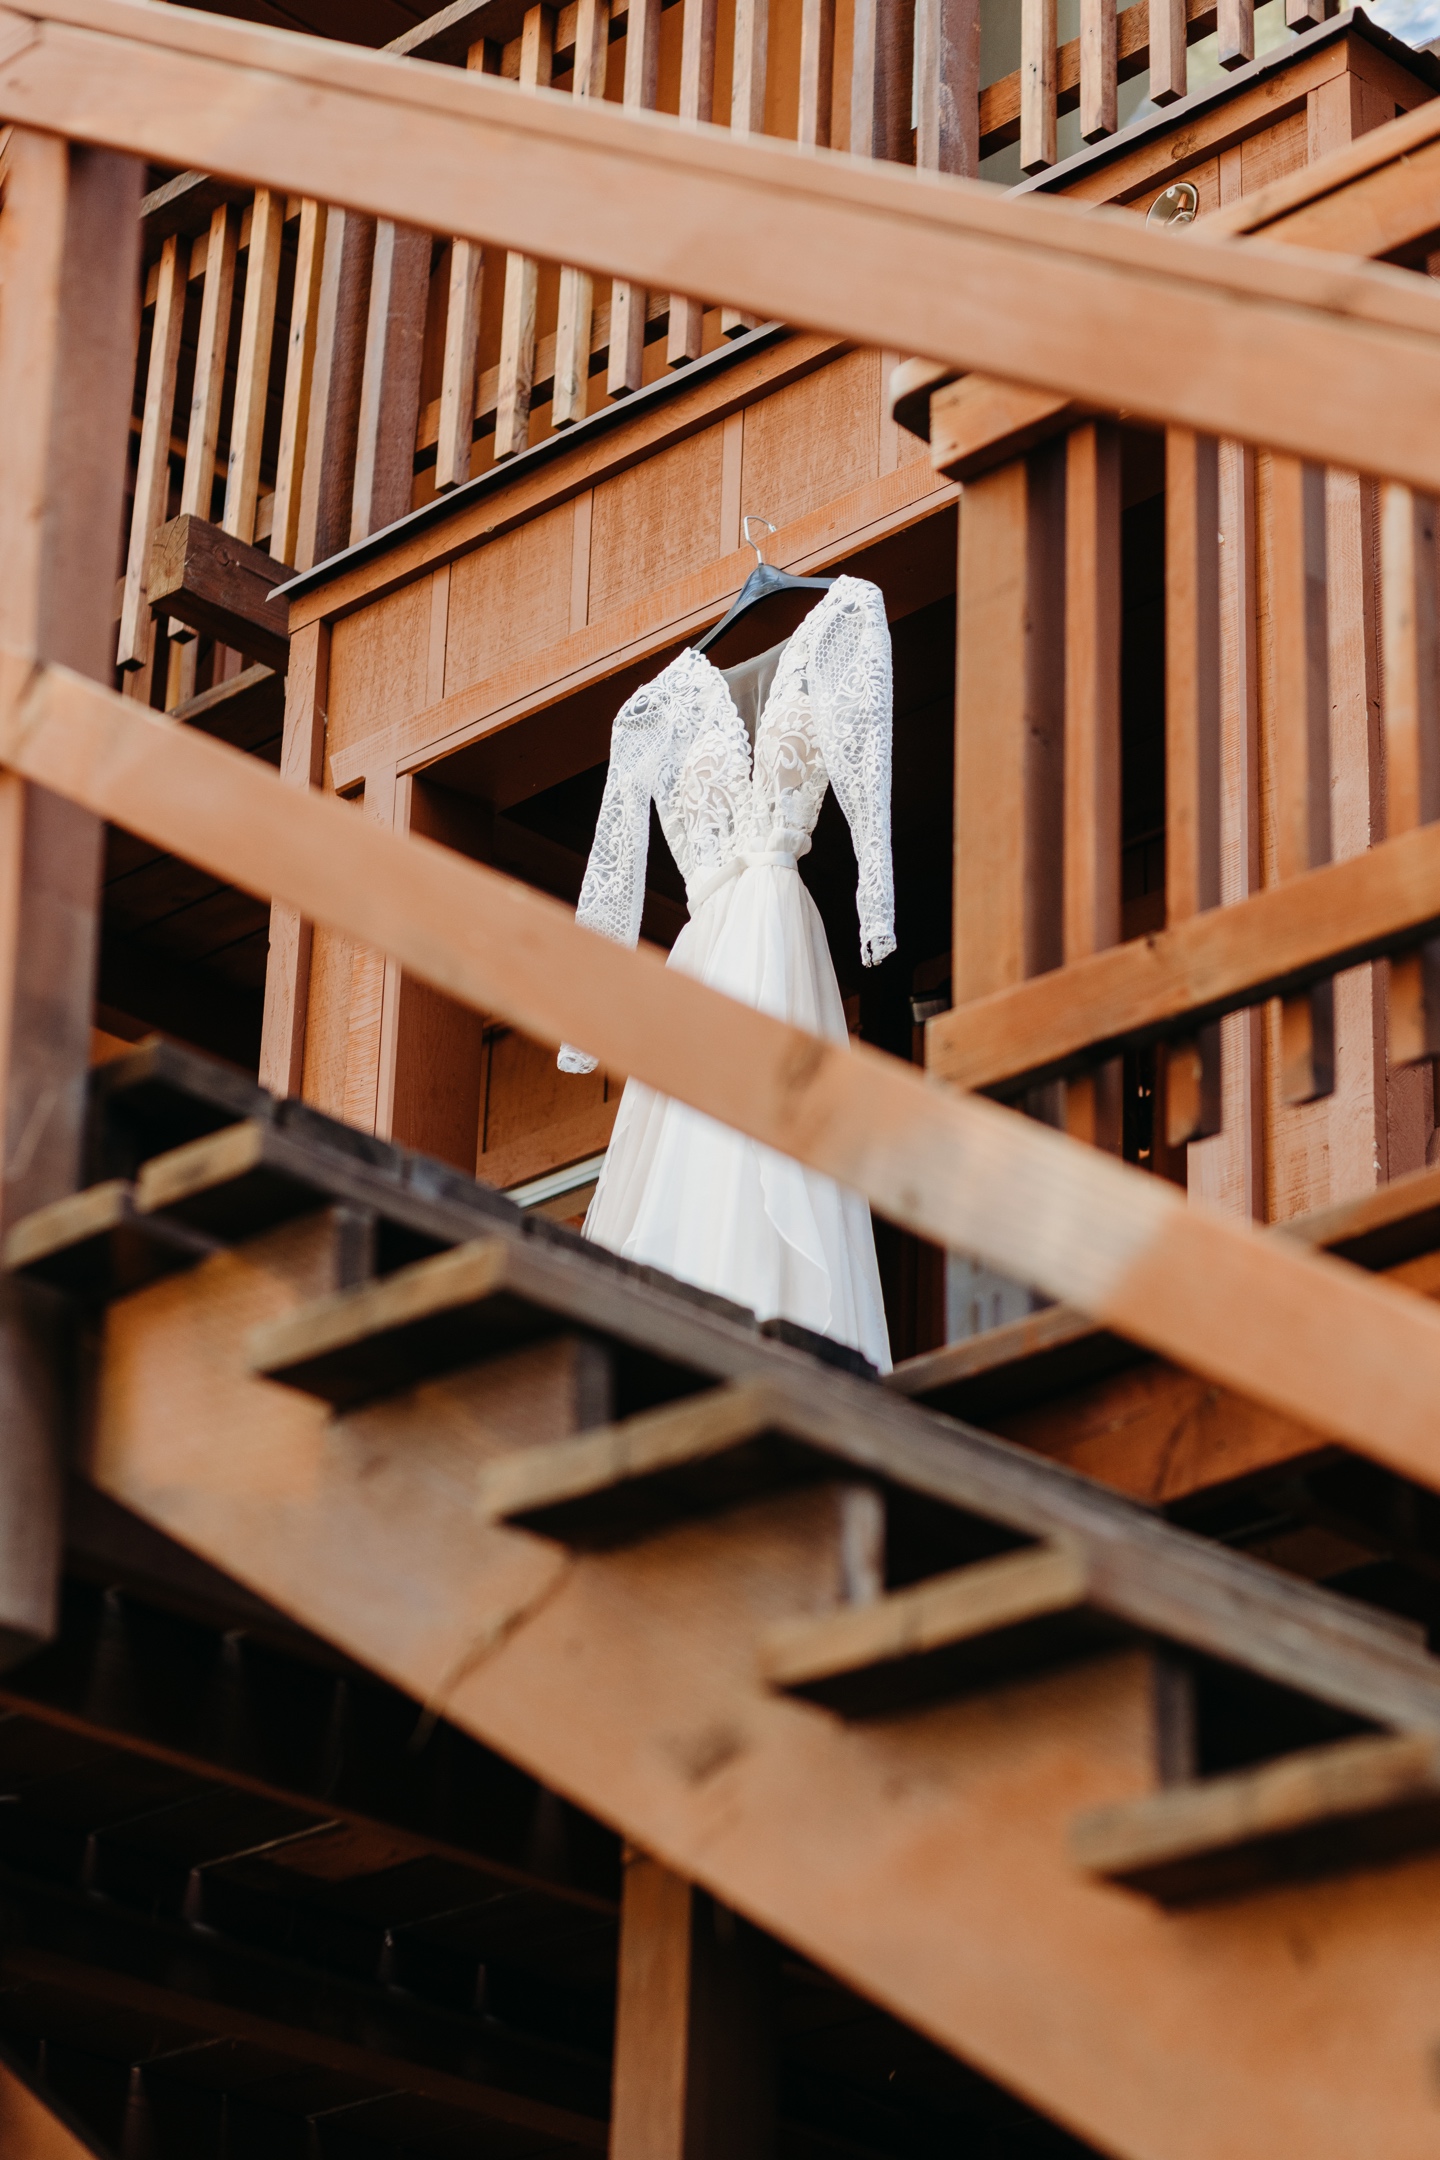 Wedding dress hangs from wood a deck as seen from the bottom of the stairs. 